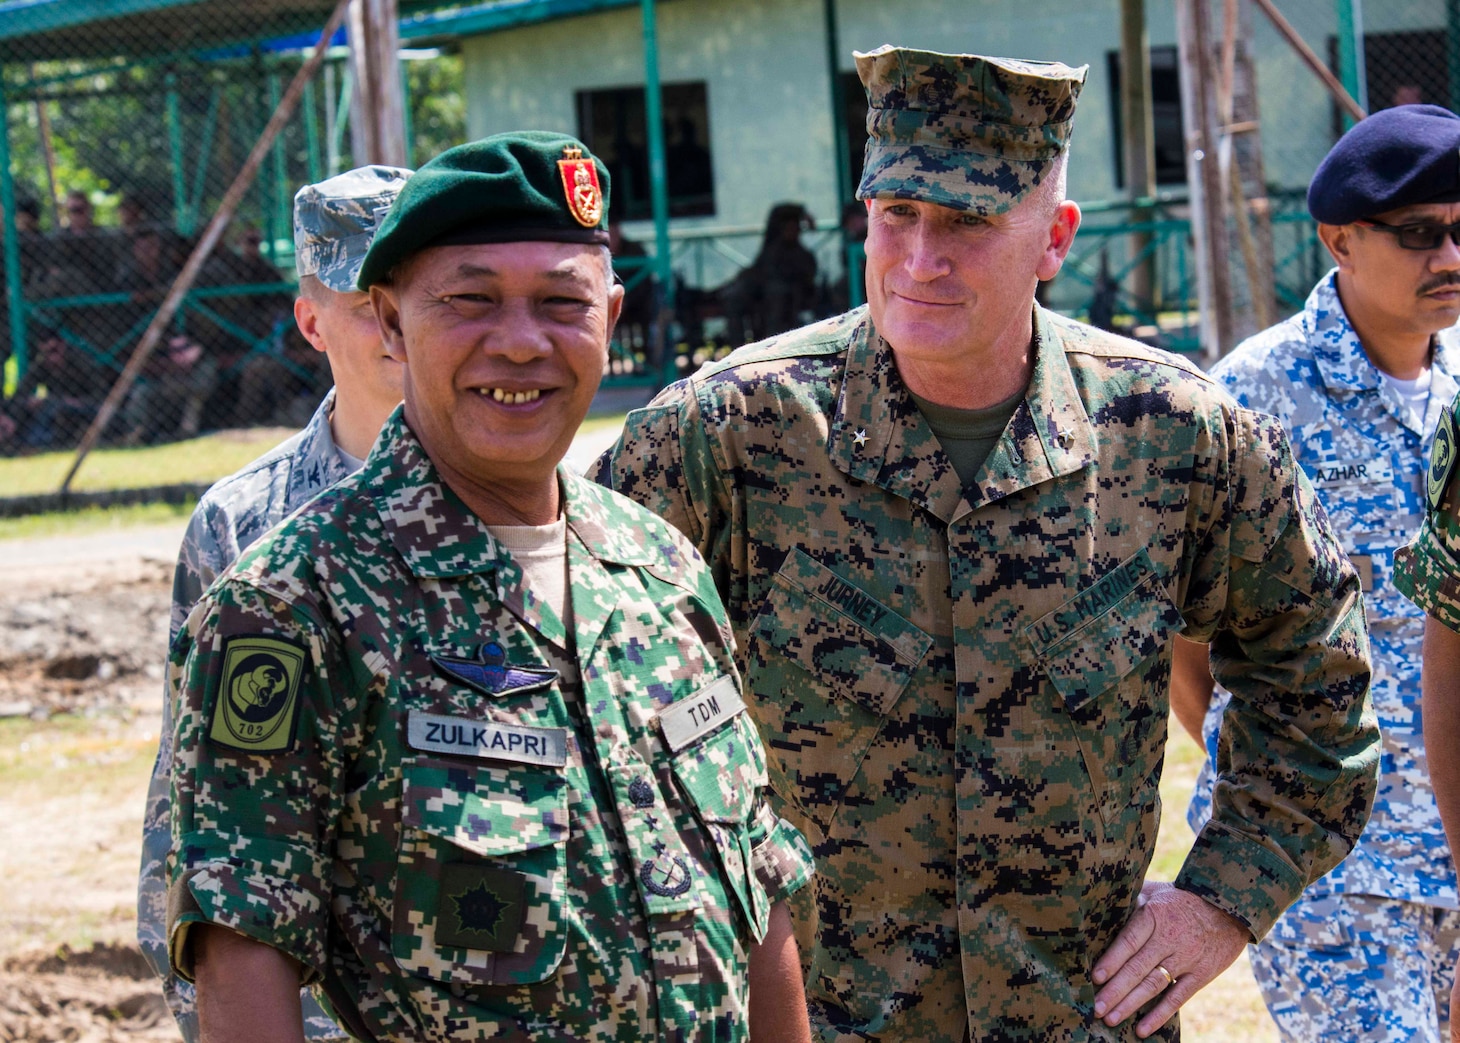 KOTA KINABALU, Malaysia (August 10, 2018) - Brig. Gen. William Jurney, Commanding General of 3rd Marine Infantry Division, and Maj. Gen. Dato� Zulkapri bin Rahamat, General of Officer Commanding Task Force 450, meet before the opening ceremony of Cooperation Afloat Readiness and Training (CARAT) Malaysia on Kota Belud Marine Base. CARAT Malaysia in its 24th iteration, is designed to enhance information sharing and coordination, build mutual warfighting capability and support long-term regional cooperation enabling both partner armed forces to operate effectively together as a unified maritime force.